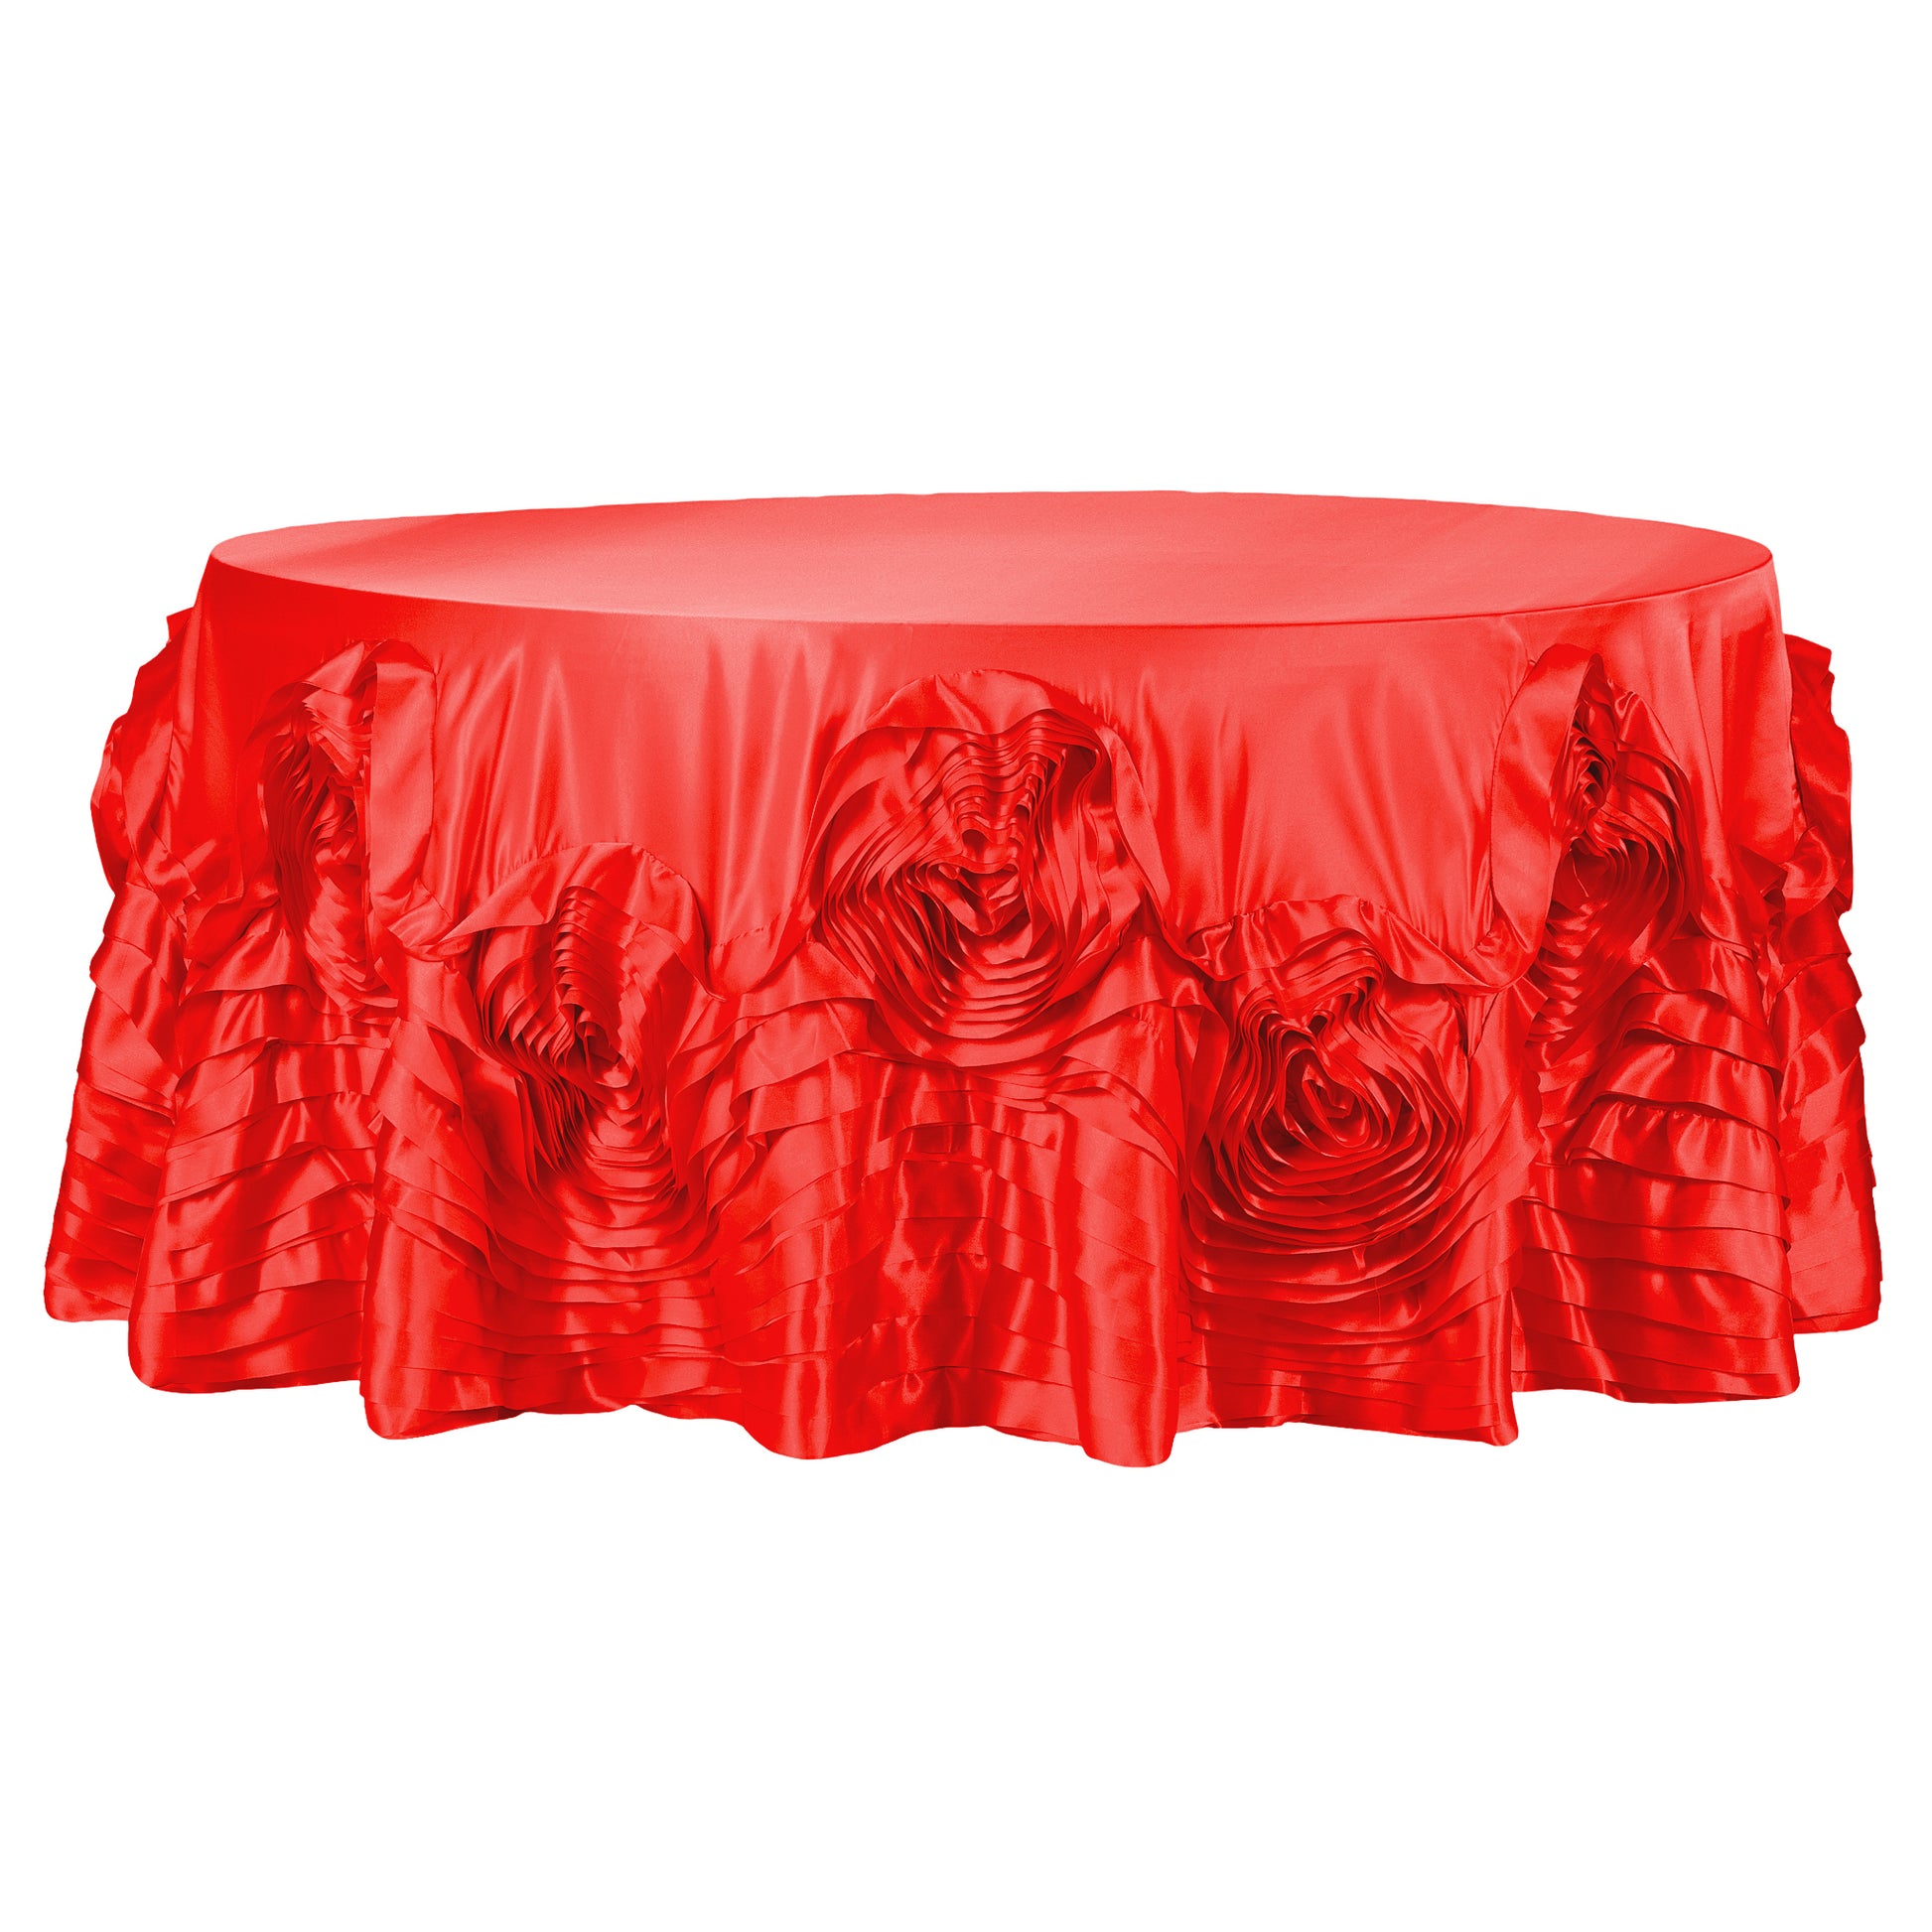 Large Rosette Flower Tablecloth 120" Round - Red - CV Linens